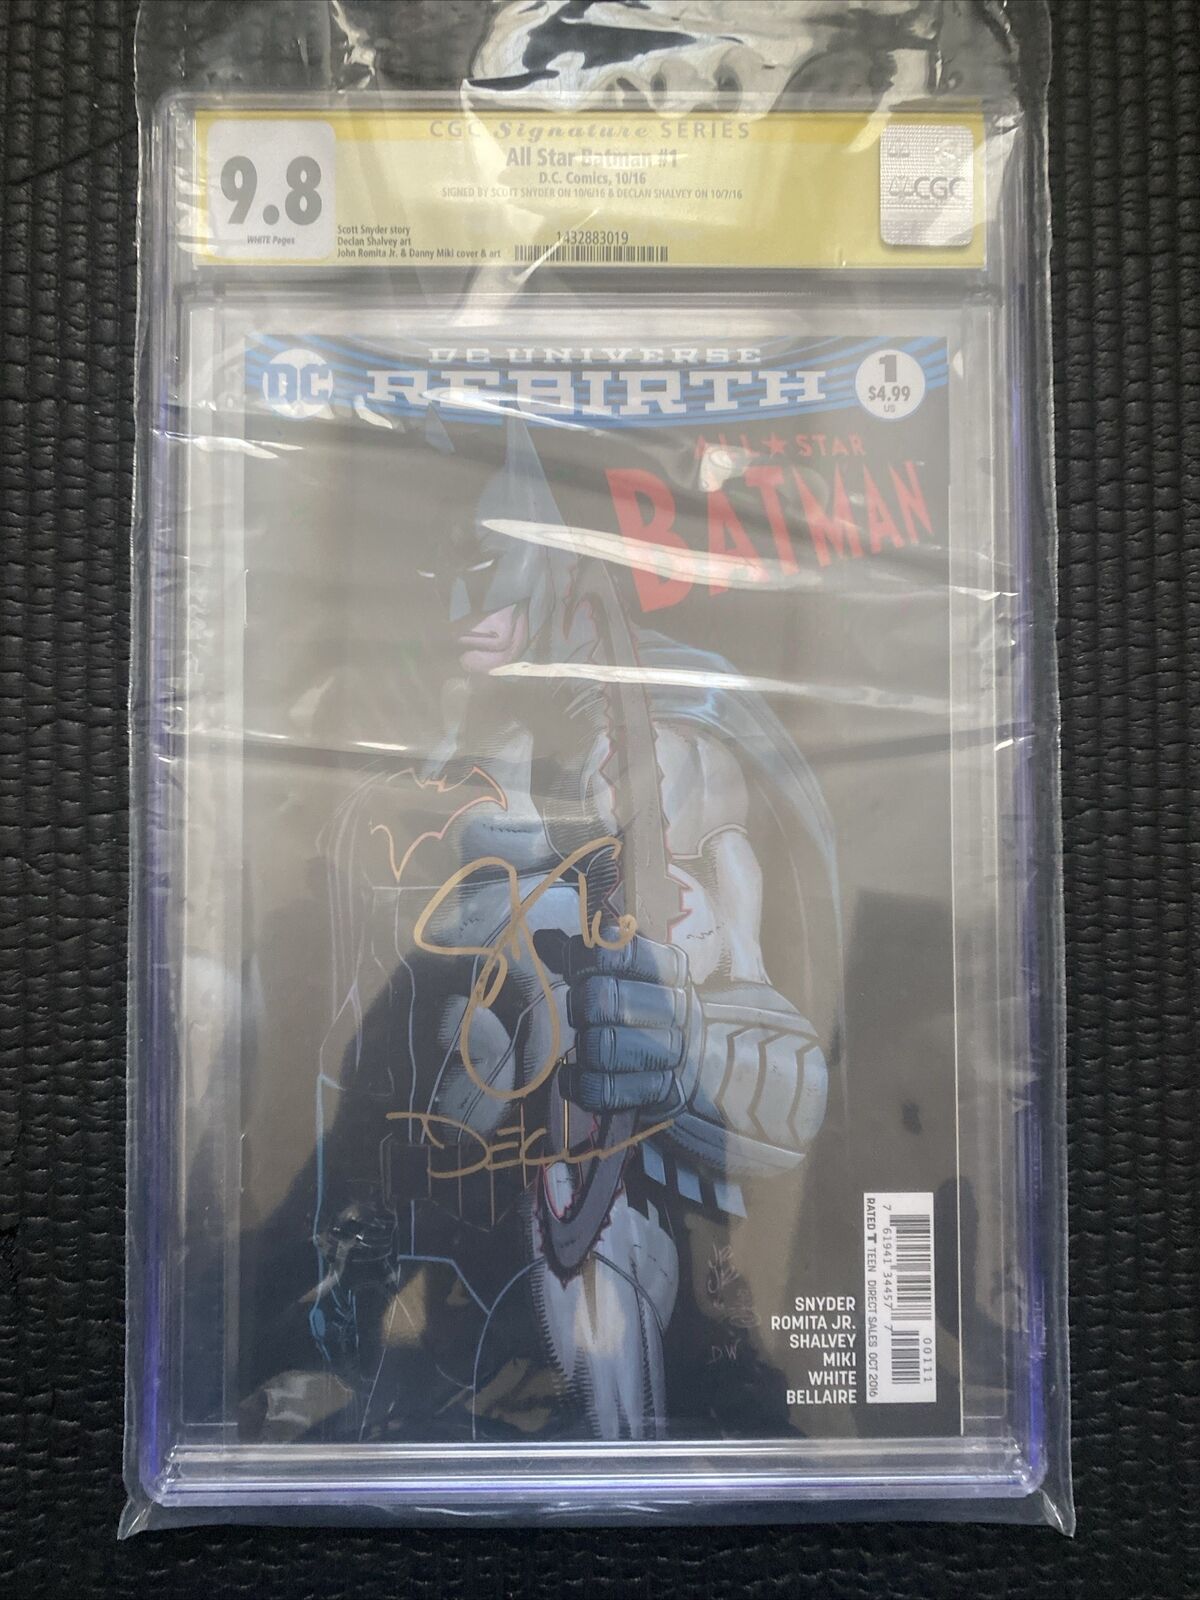 All Star Batman #1🔥🔥CGC 9.8 Signed Romita Variant Signed By Snyder & Shalvey